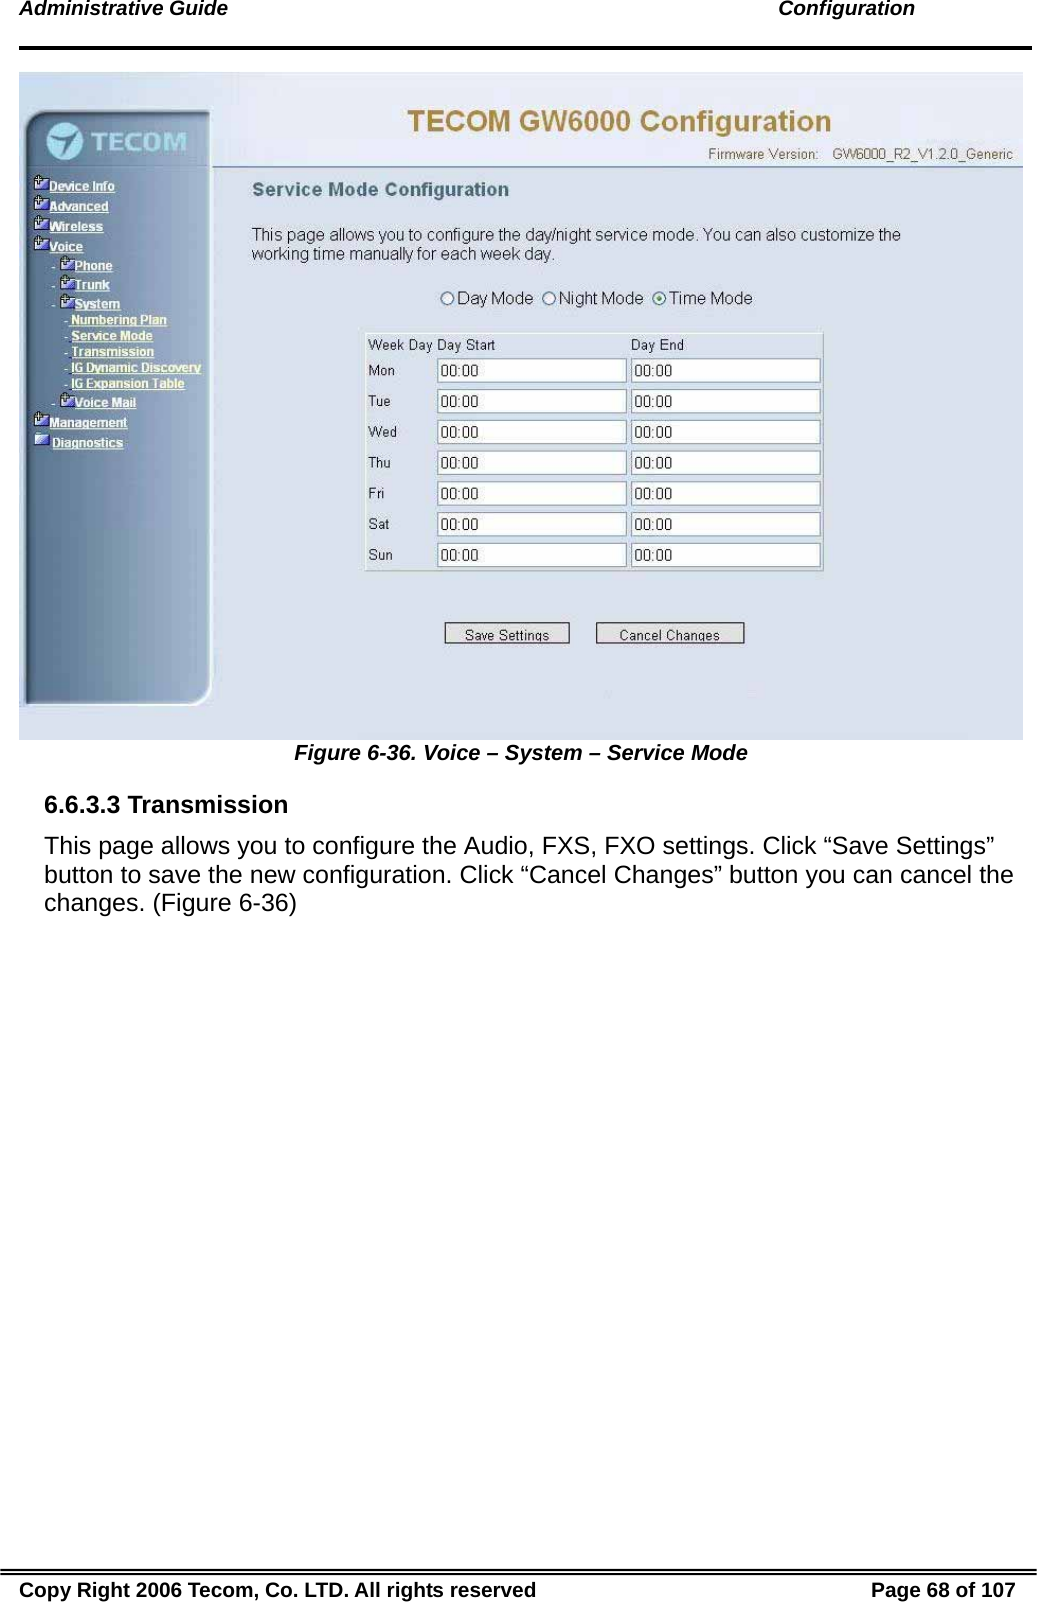 Administrative Guide                                                                                               Configuration  Figure 6-36. Voice – System – Service Mode 6.6.3.3 Transmission This page allows you to configure the Audio, FXS, FXO settings. Click “Save Settings” button to save the new configuration. Click “Cancel Changes” button you can cancel the changes. (Figure 6-36) Copy Right 2006 Tecom, Co. LTD. All rights reserved  Page 68 of 107 